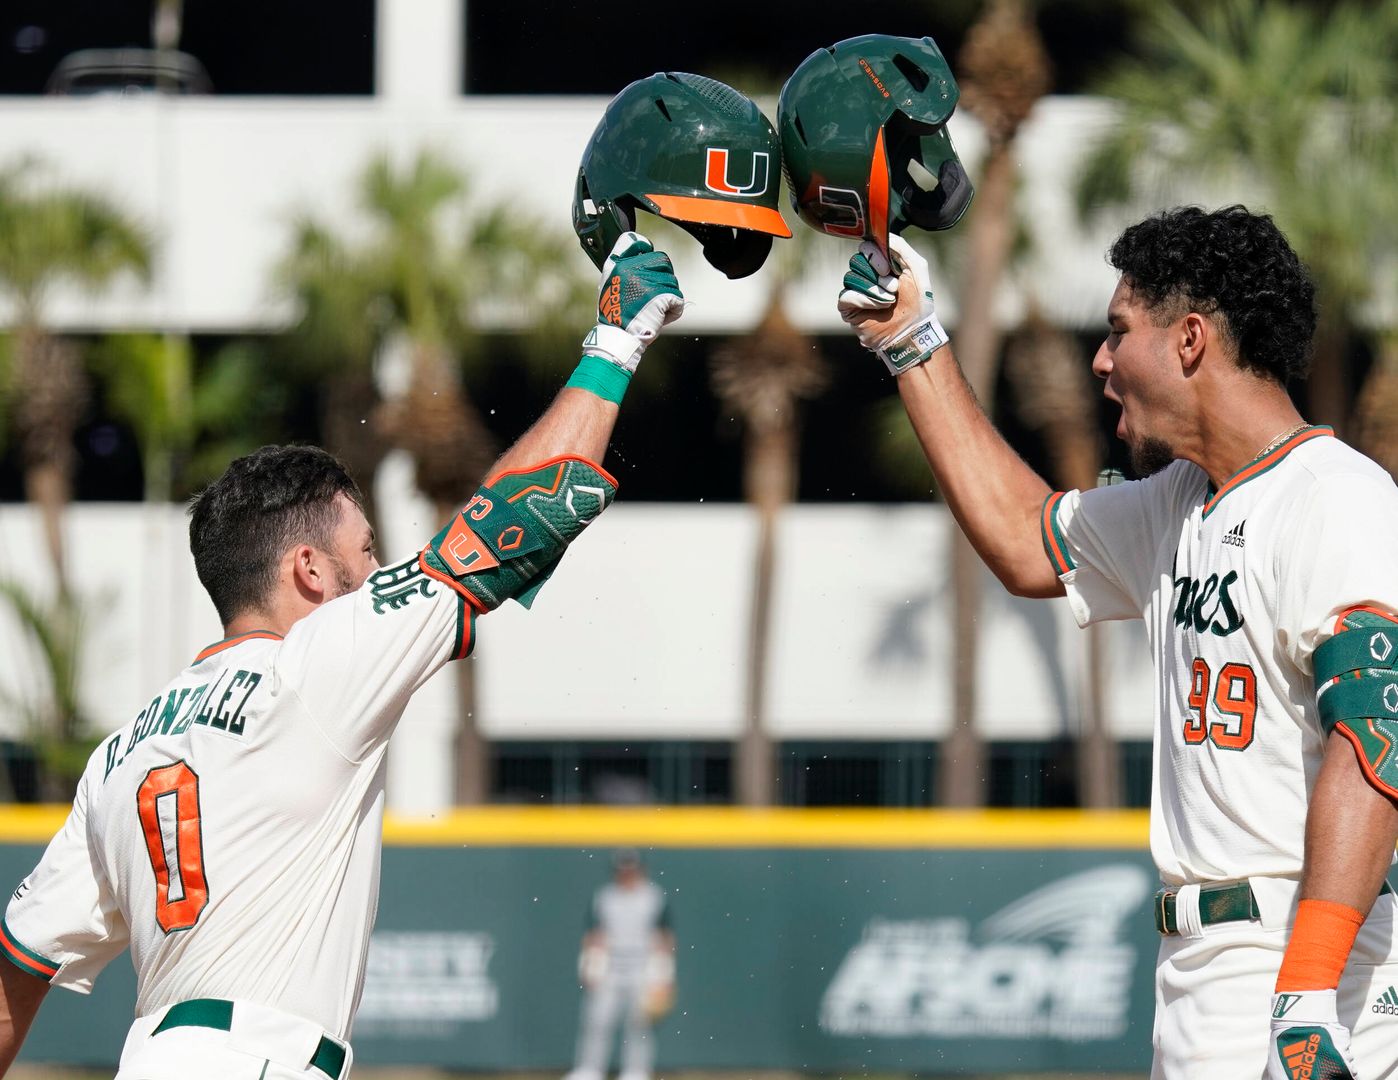 Canes Carry Hot Bats into Clash with Crimson